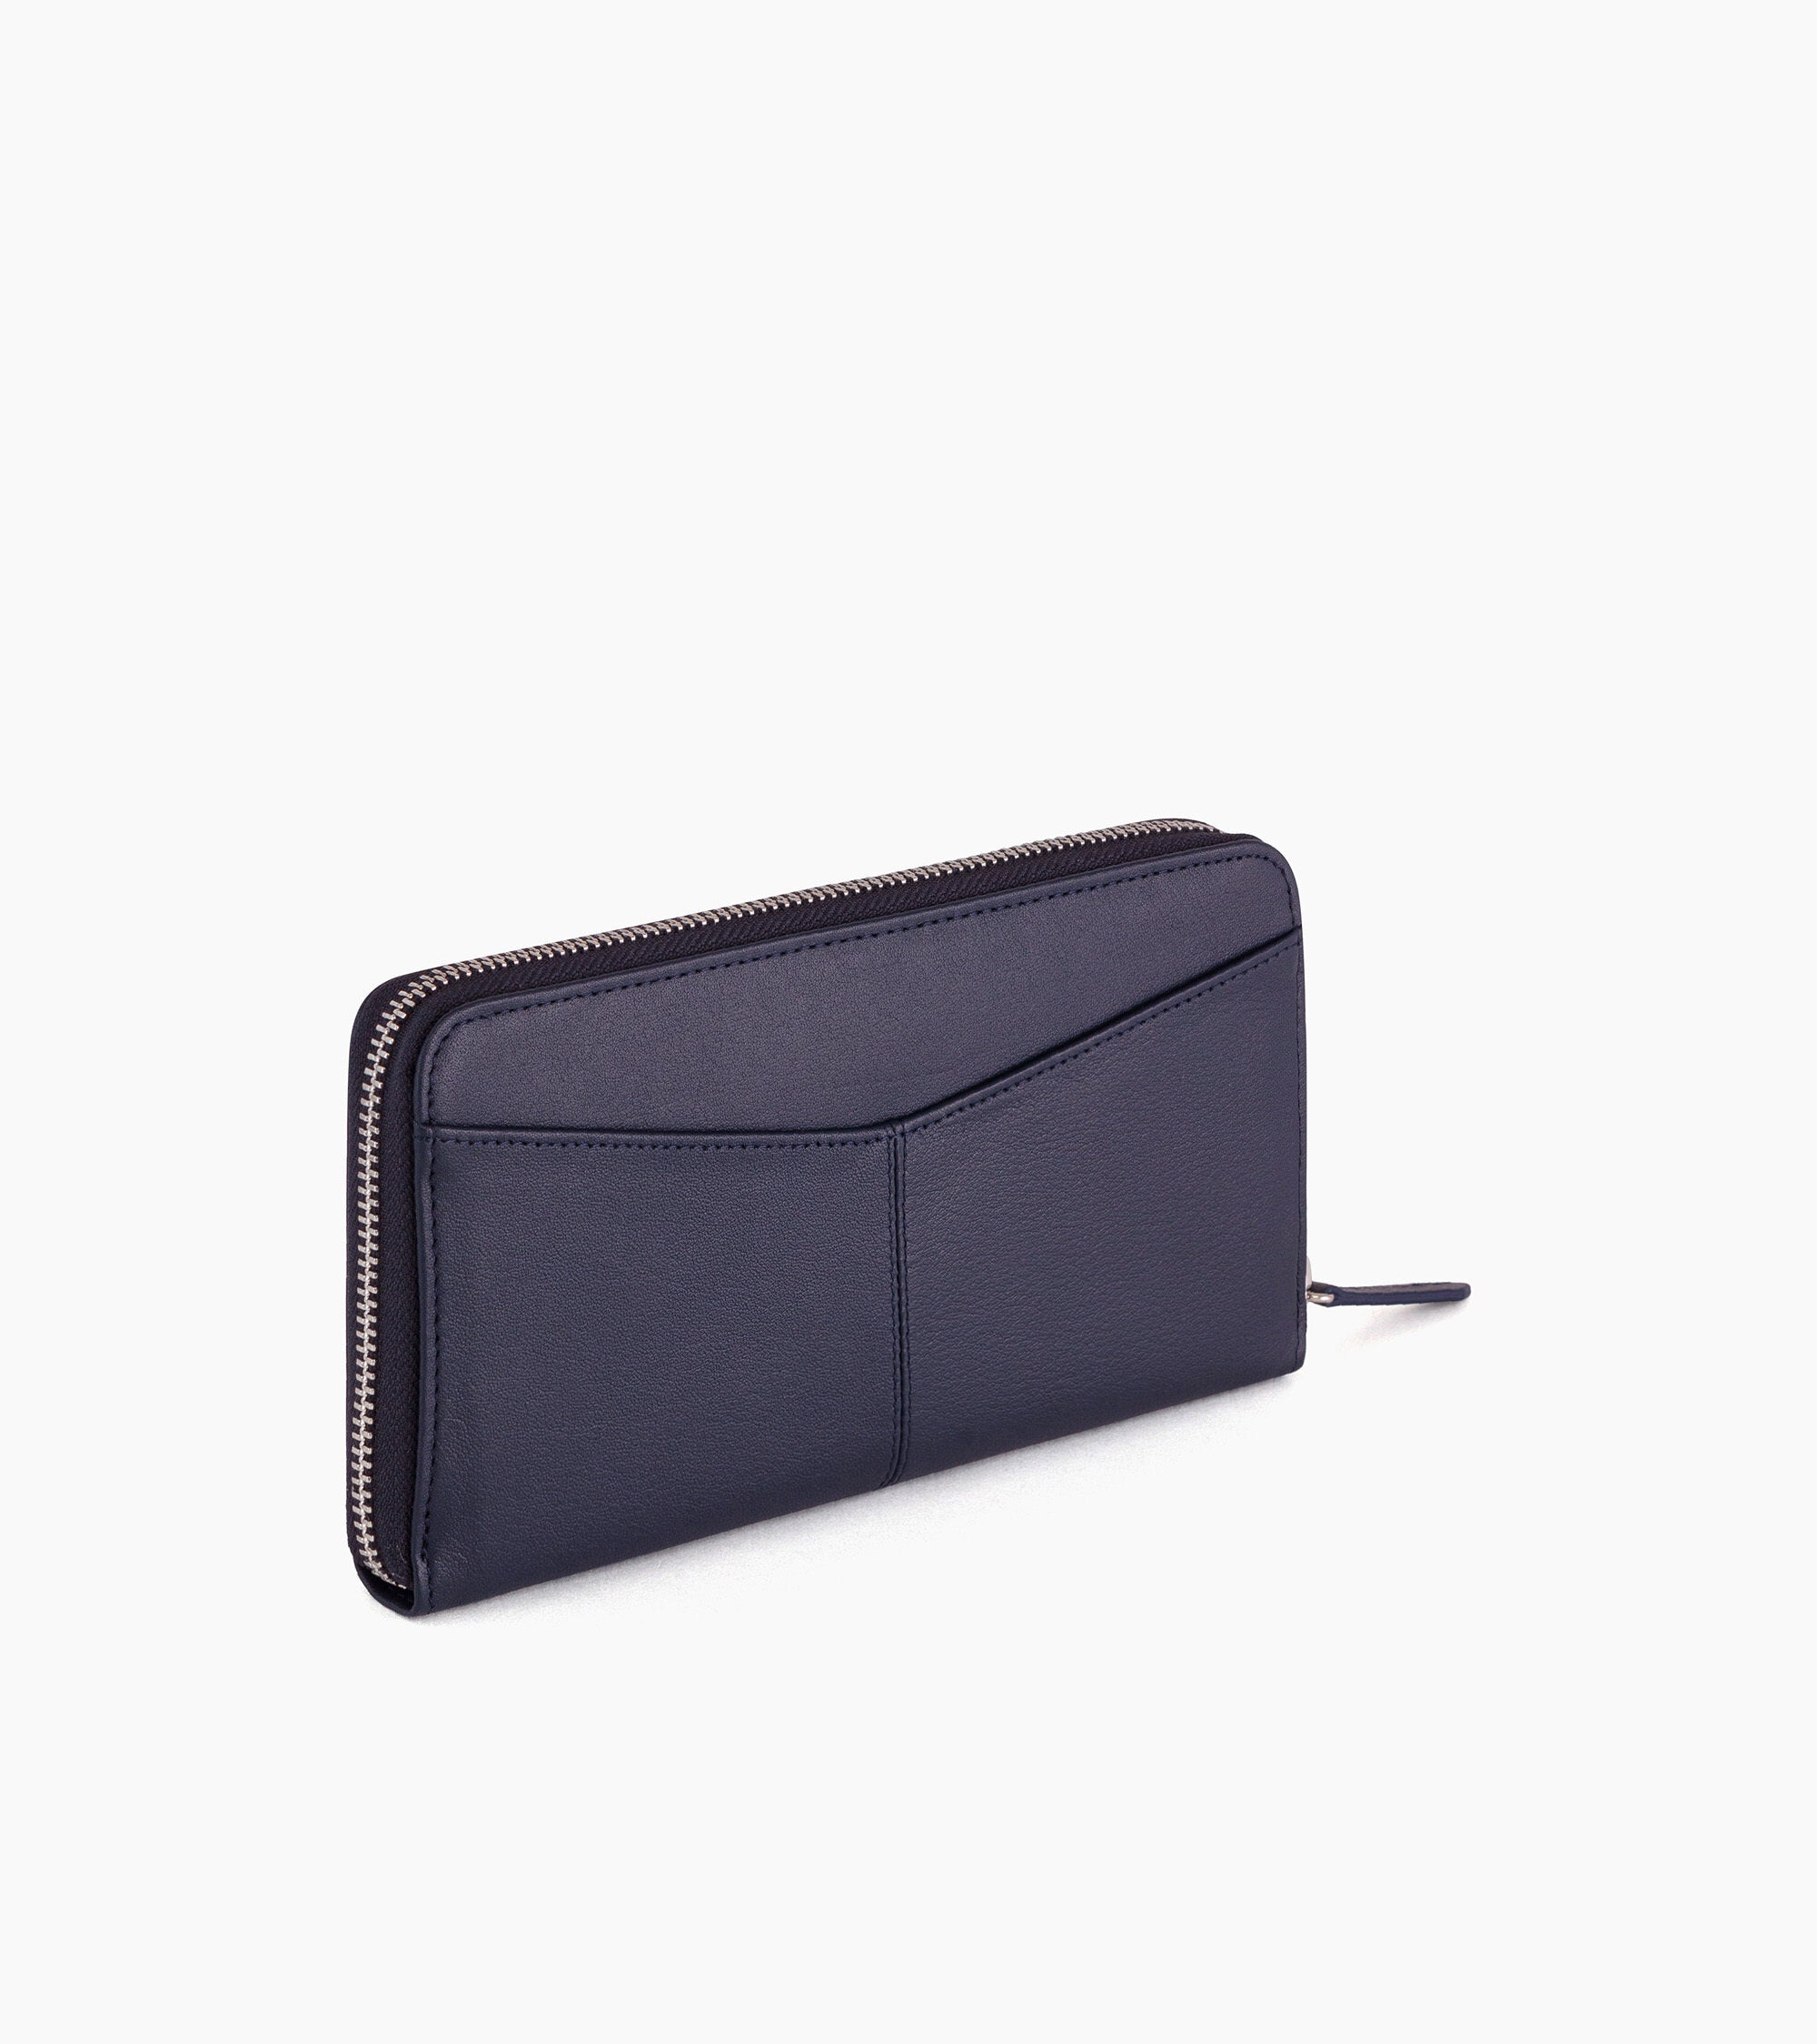 Charlotte smooth leather Organizer wallet